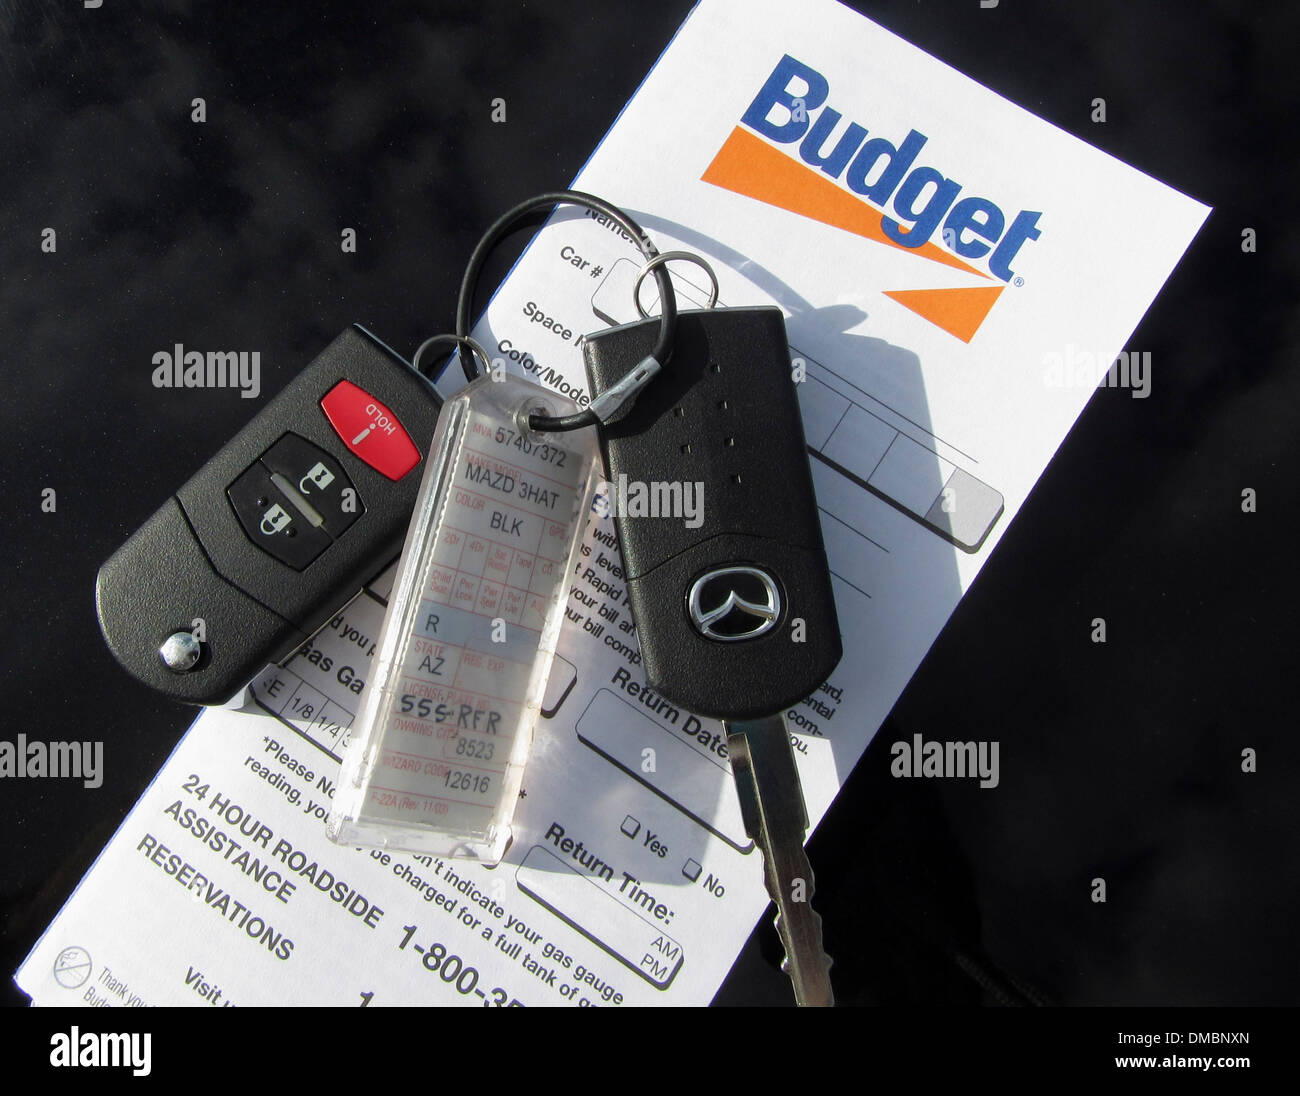 Budget Rent a Car contract and keys. The license number was digitally altered. Stock Photo